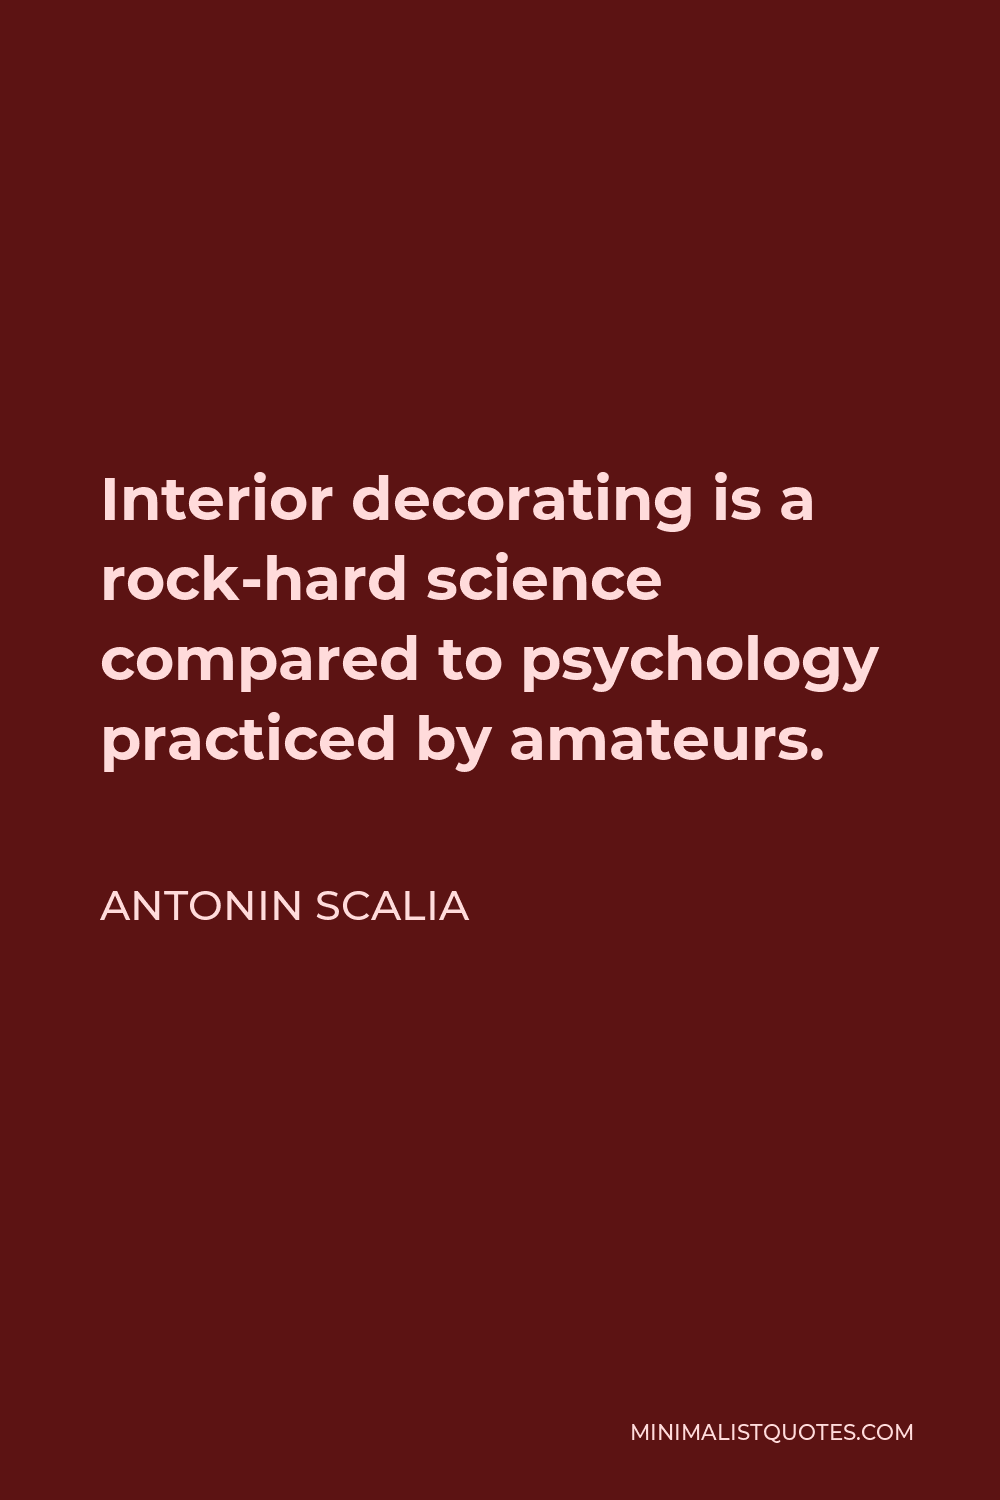 Antonin Scalia Quote - Interior decorating is a rock-hard science compared to psychology practiced by amateurs.